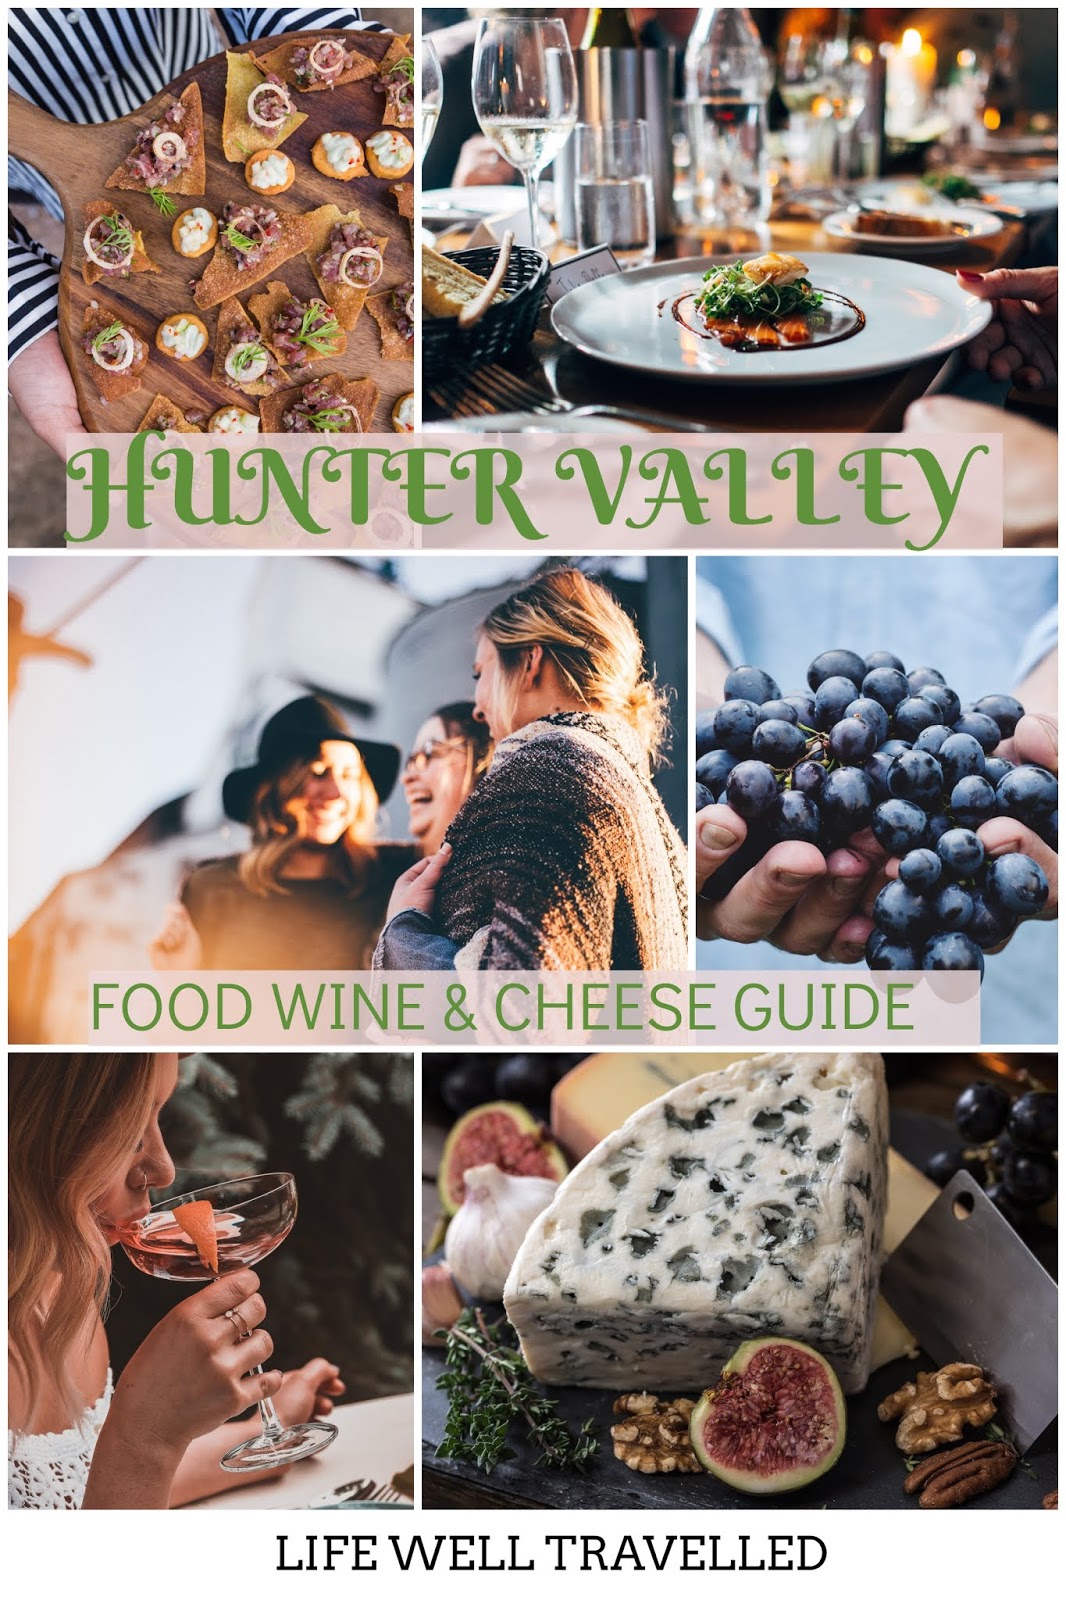 Hunter Valley: Food, Wine & Cheese Guide